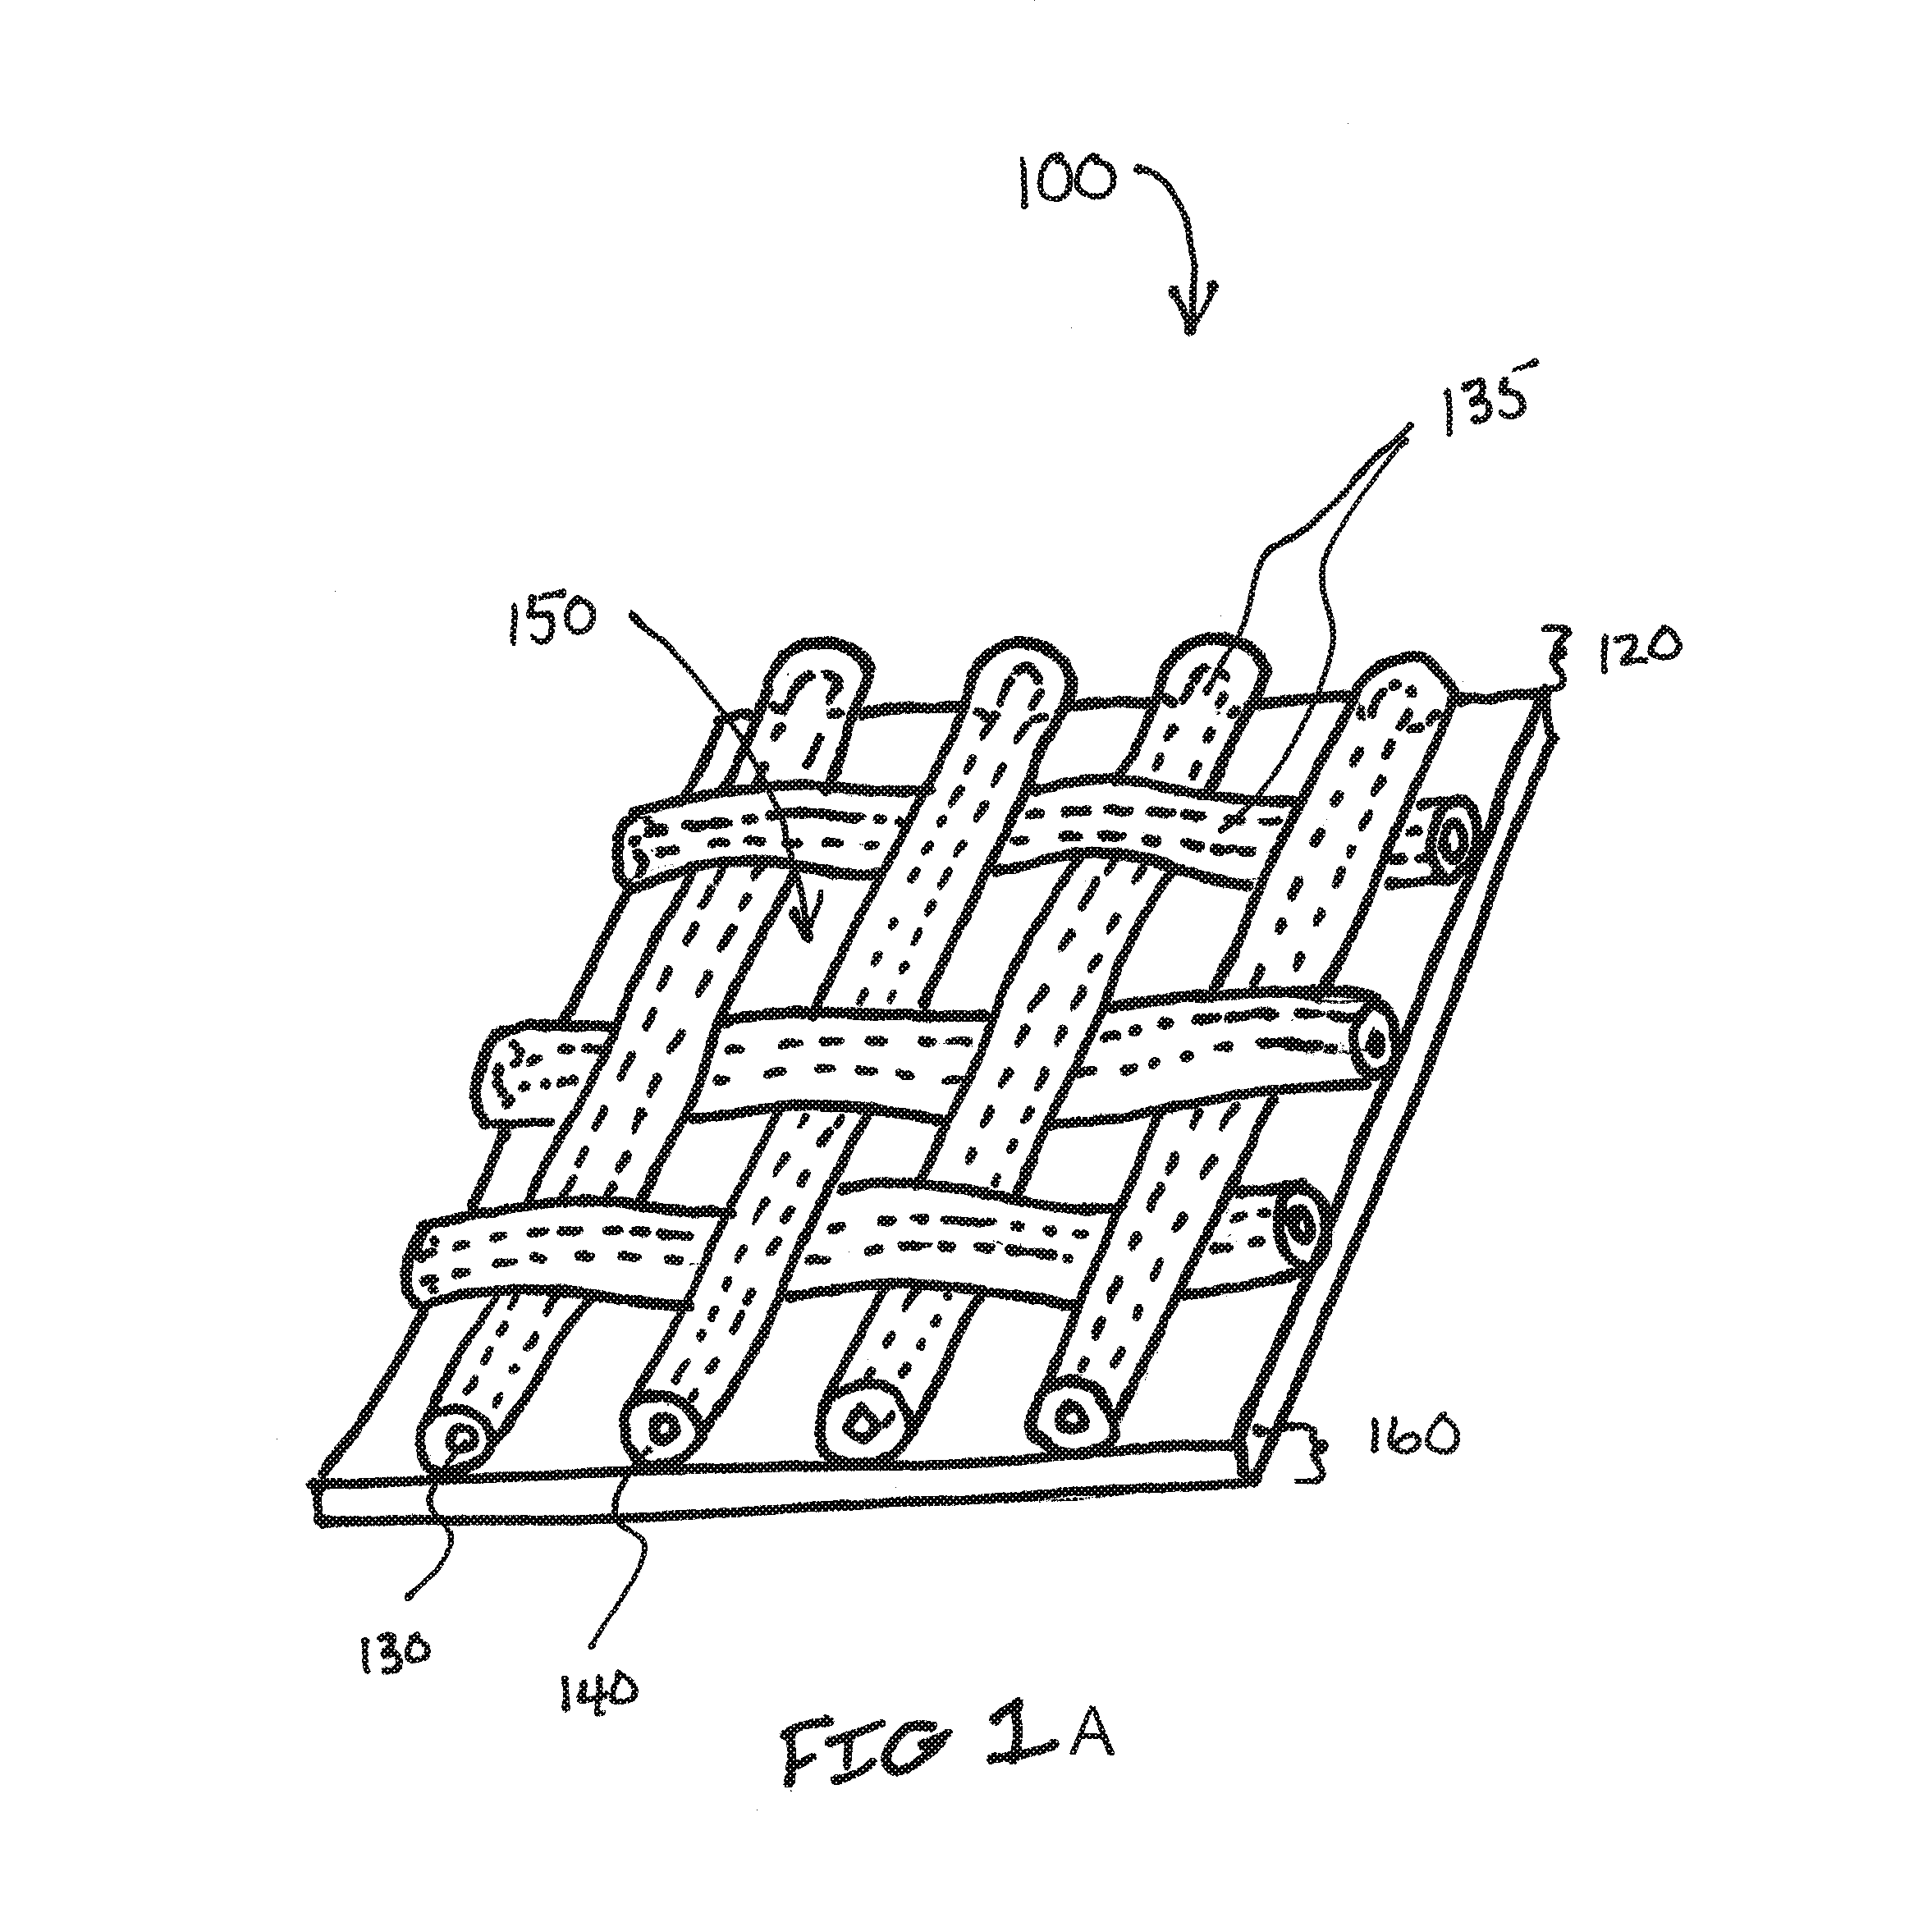 Apparatus and method for limiting surgical adhesions